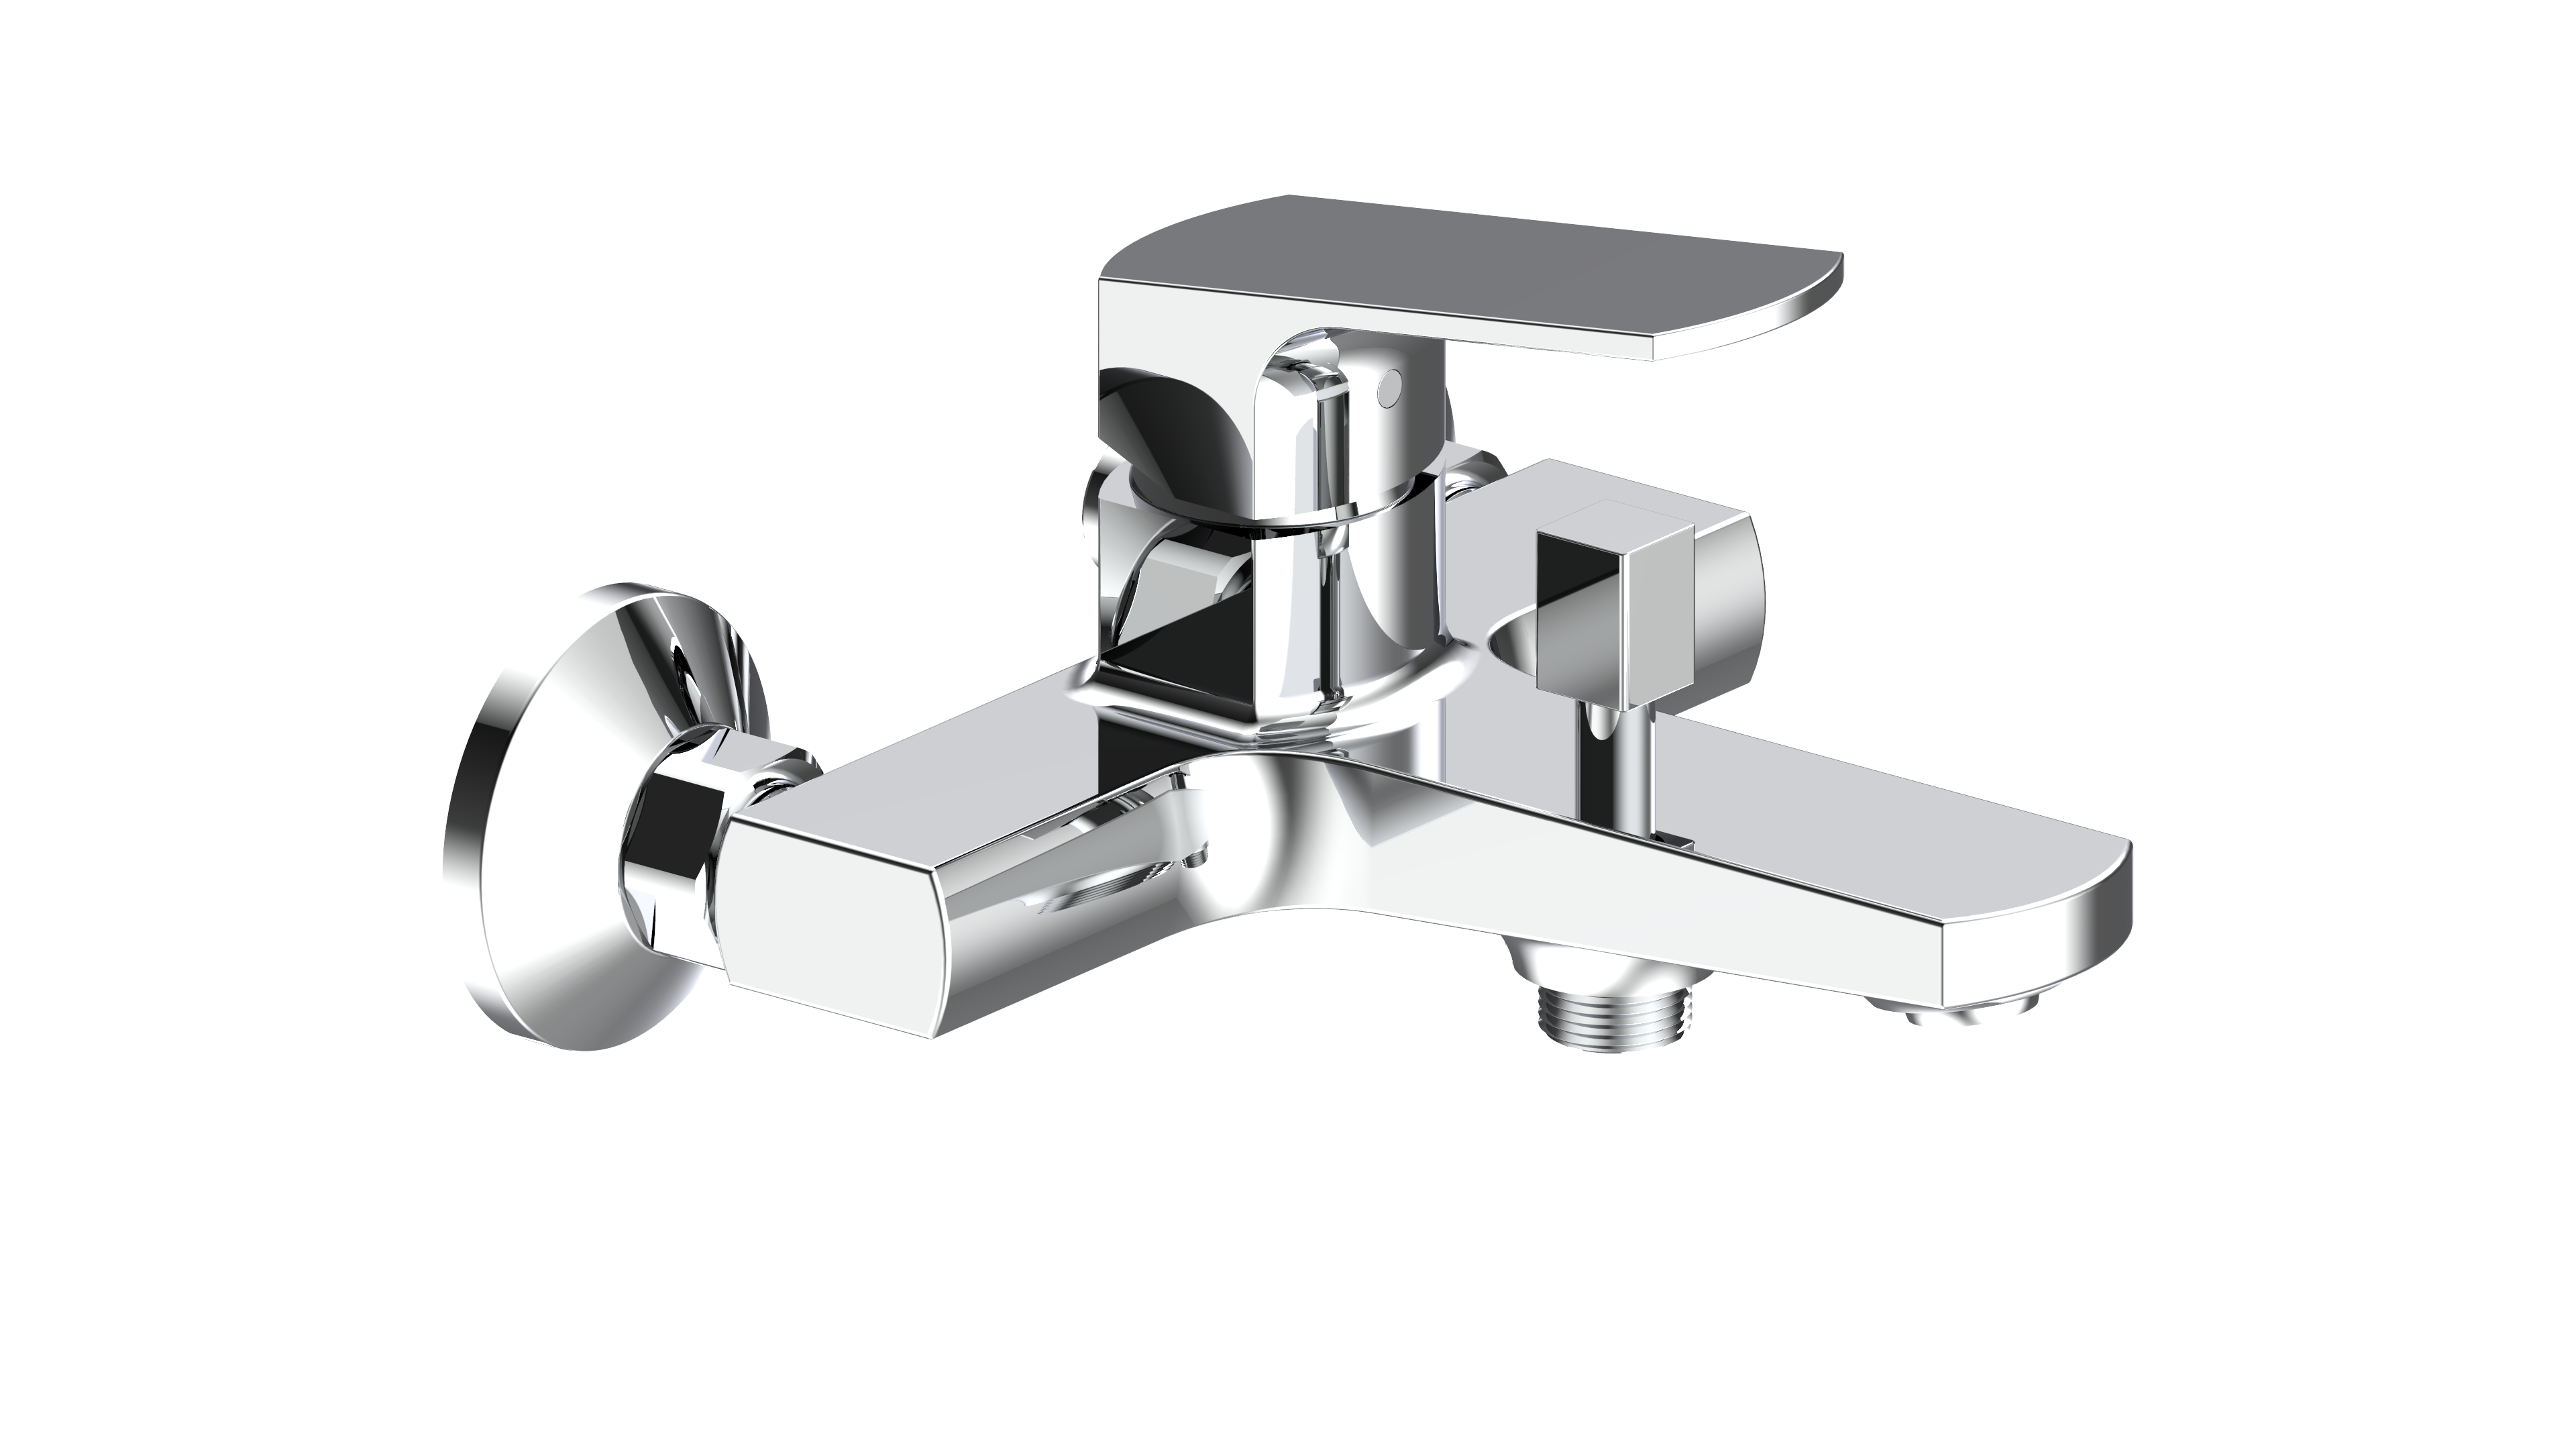 How does the weight and construction of Brass Basin Faucets impact their overall stability and reliability?